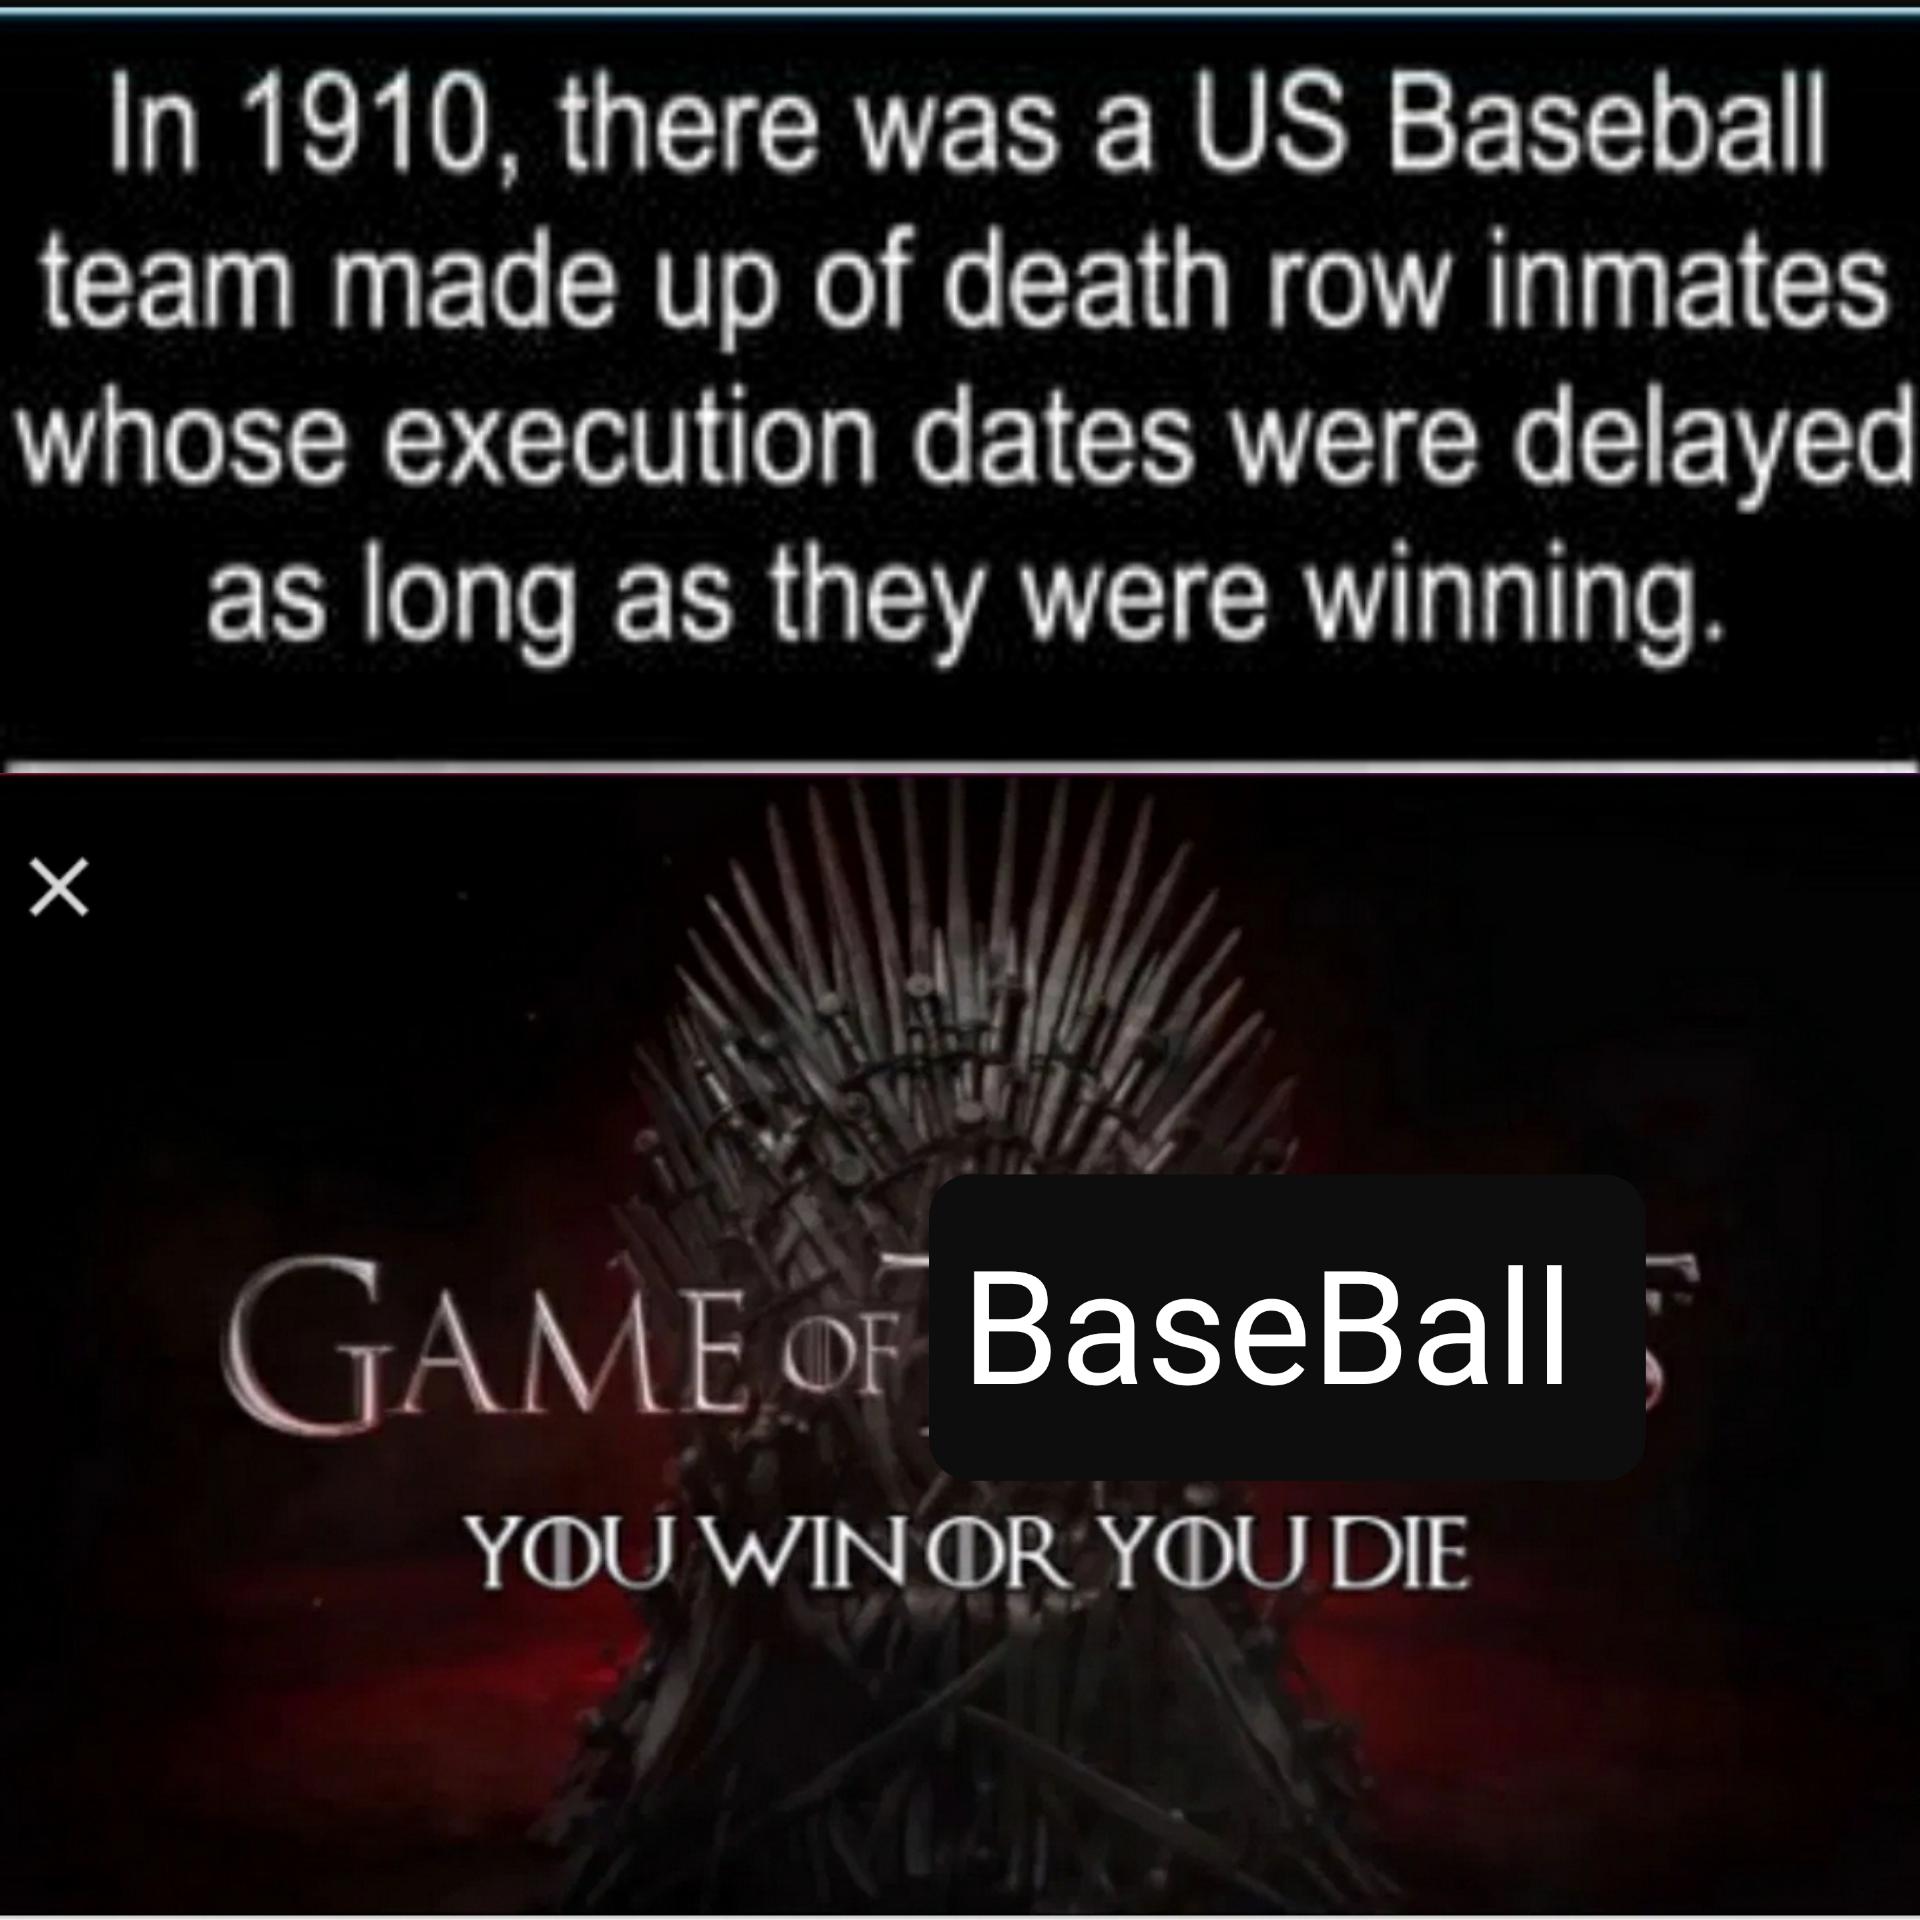 History, Baseball, Source, Game, BASEBALL, America History Memes History, Baseball, Source, Game, BASEBALL, America text: In 1910, there was a US Baseball team made up of death row inmates whose execution dates were delayed as long as they were winning. GAME BaseBaIl YOU WIN OR YOU DIE 